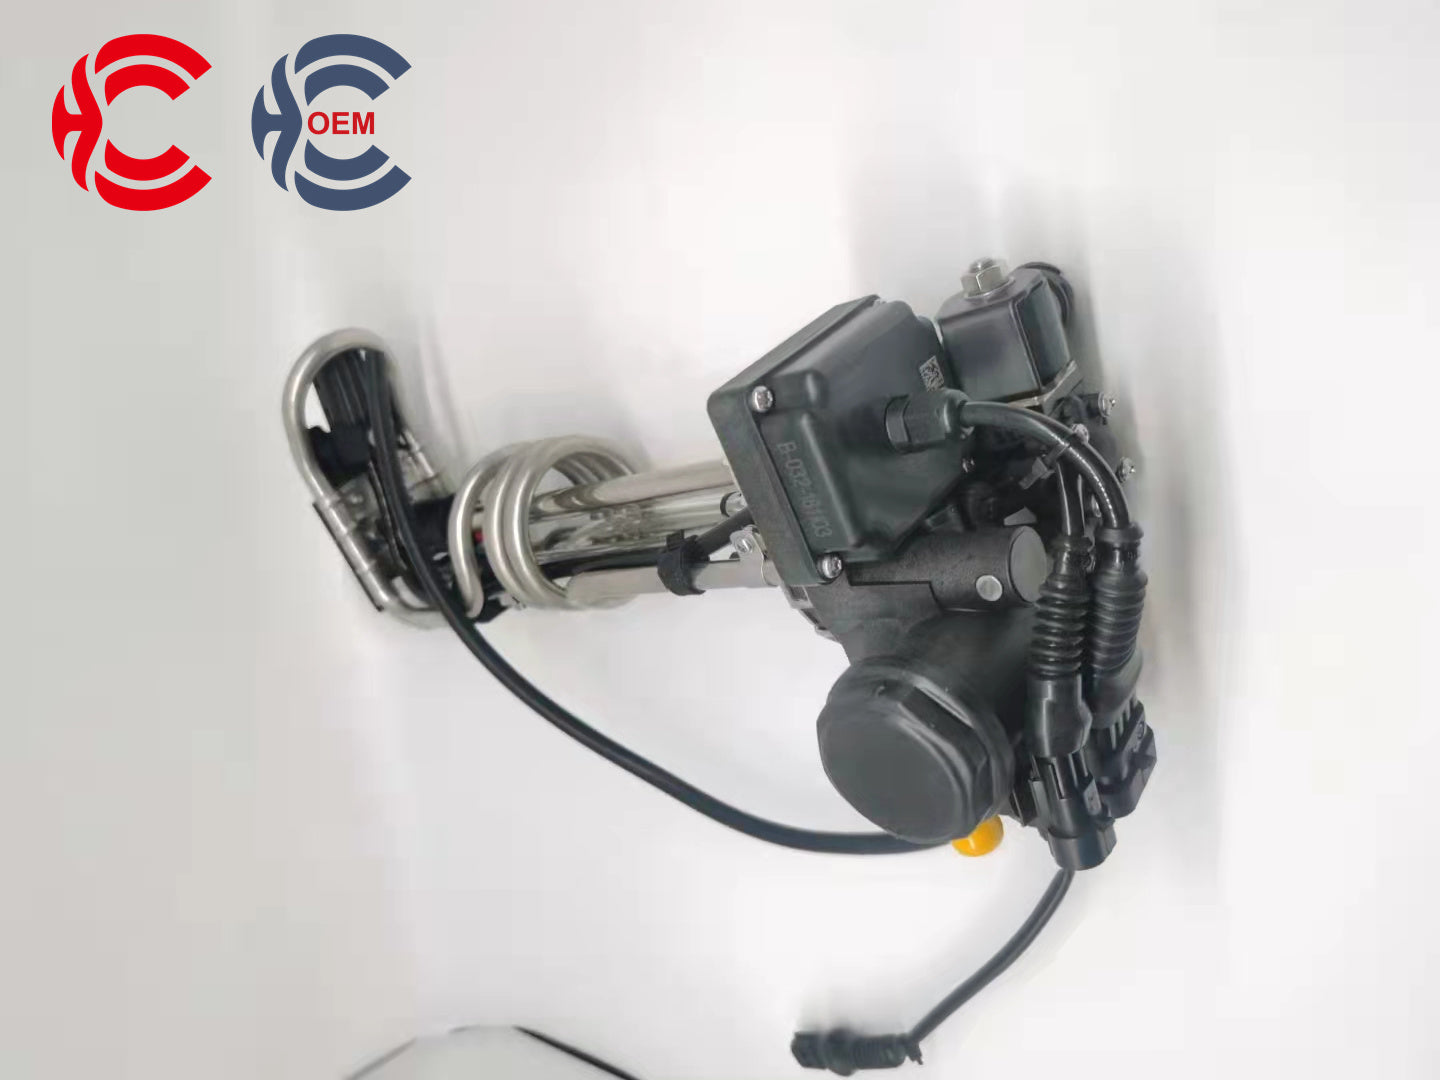 OEM: X10010966 JKA01582 HENGHEMaterial: ABS metalColor: black silverOrigin: Made in ChinaWeight: 1000gPacking List: 1* Adblue Pump More ServiceWe can provide OEM Manufacturing serviceWe can Be your one-step solution for Auto PartsWe can provide technical scheme for you Feel Free to Contact Us, We will get back to you as soon as possible.